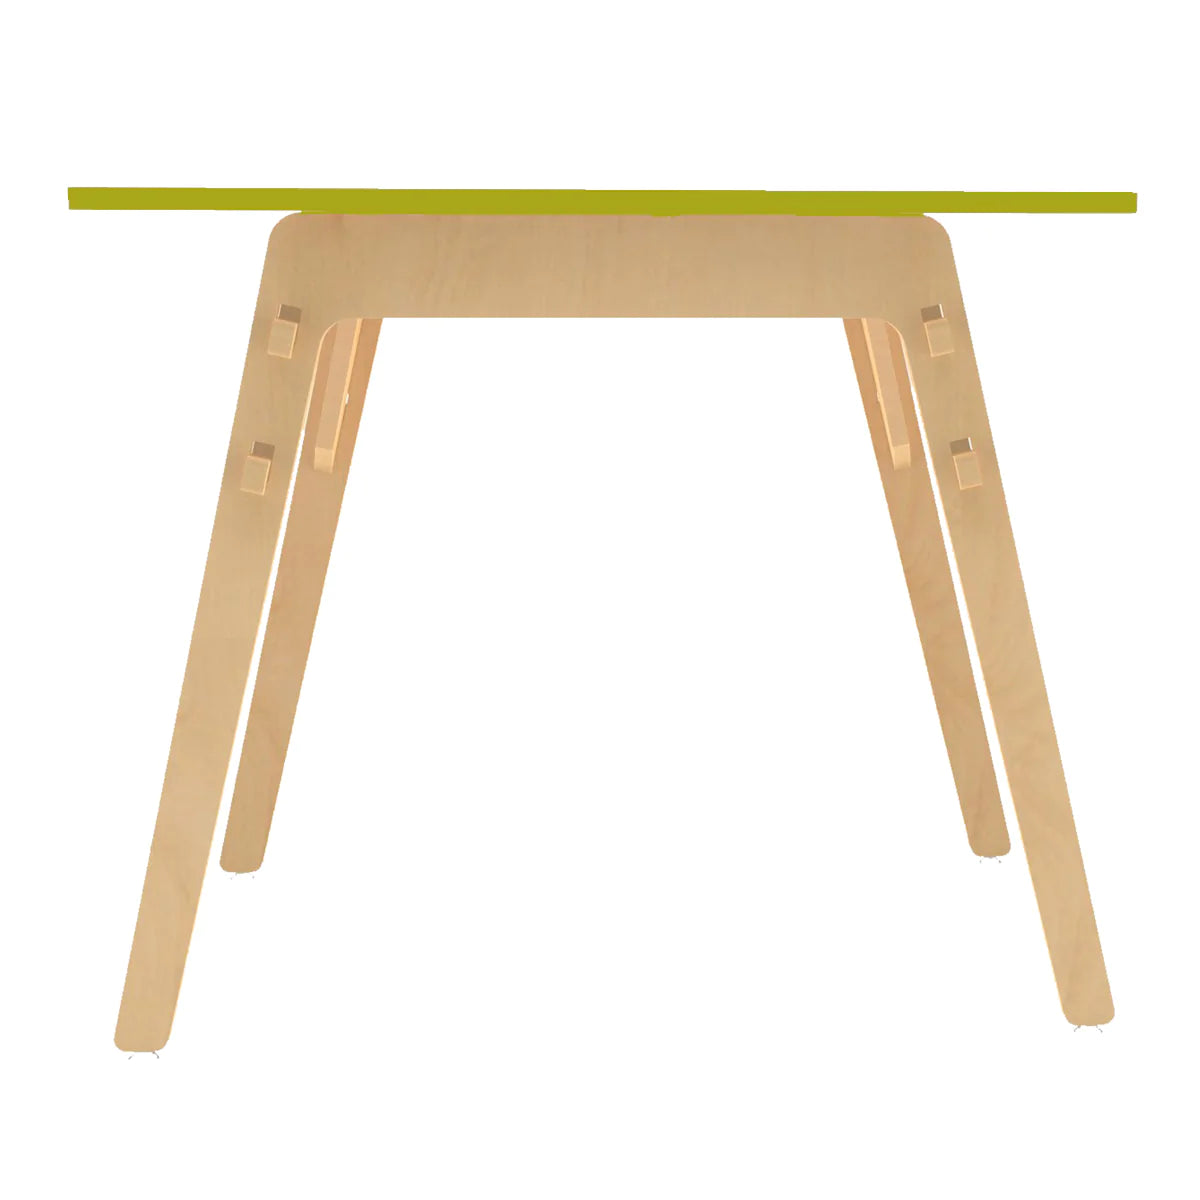 Buy Black Kiwi Wooden Table - Green - Front View - SkilloToys.com